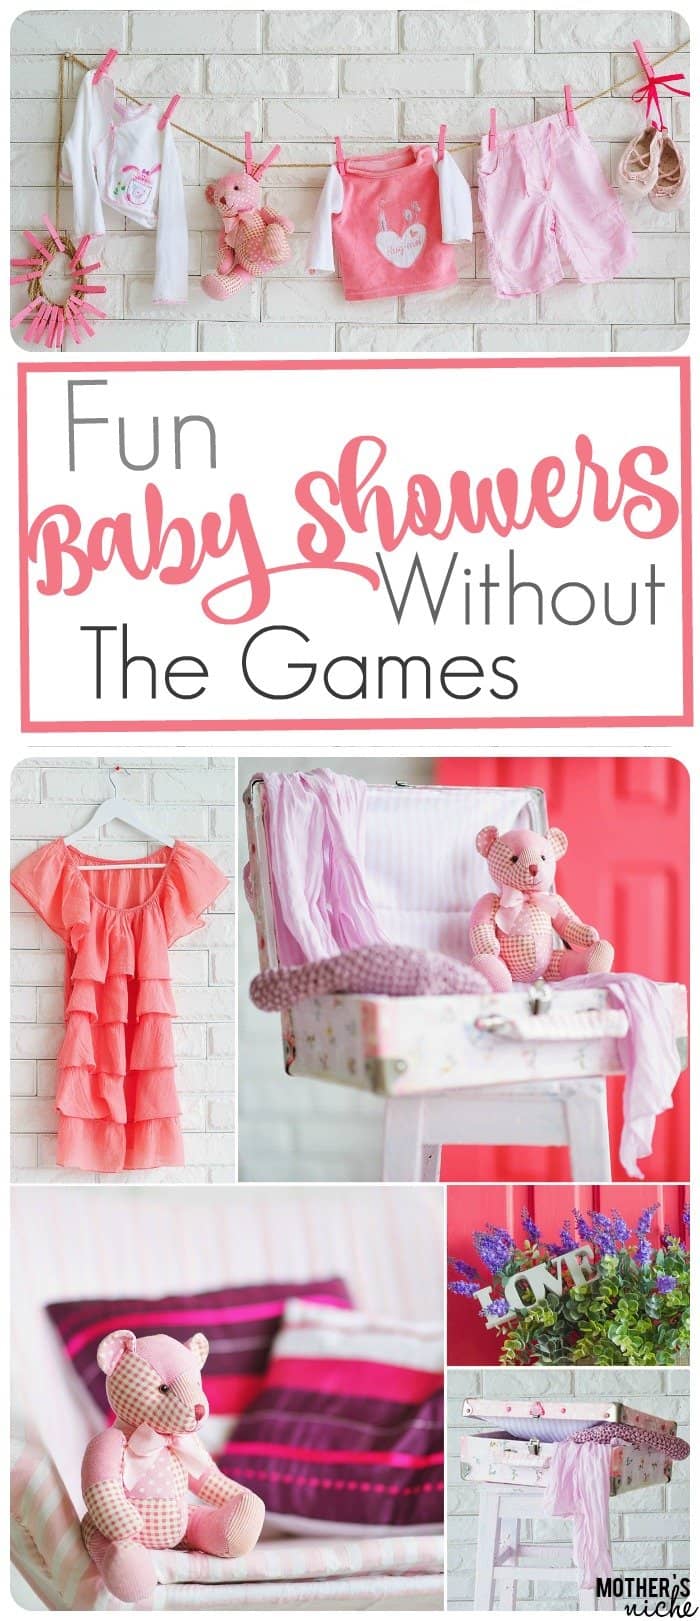 All sorts of Fun Baby Shower Ideas that don't involve playing games